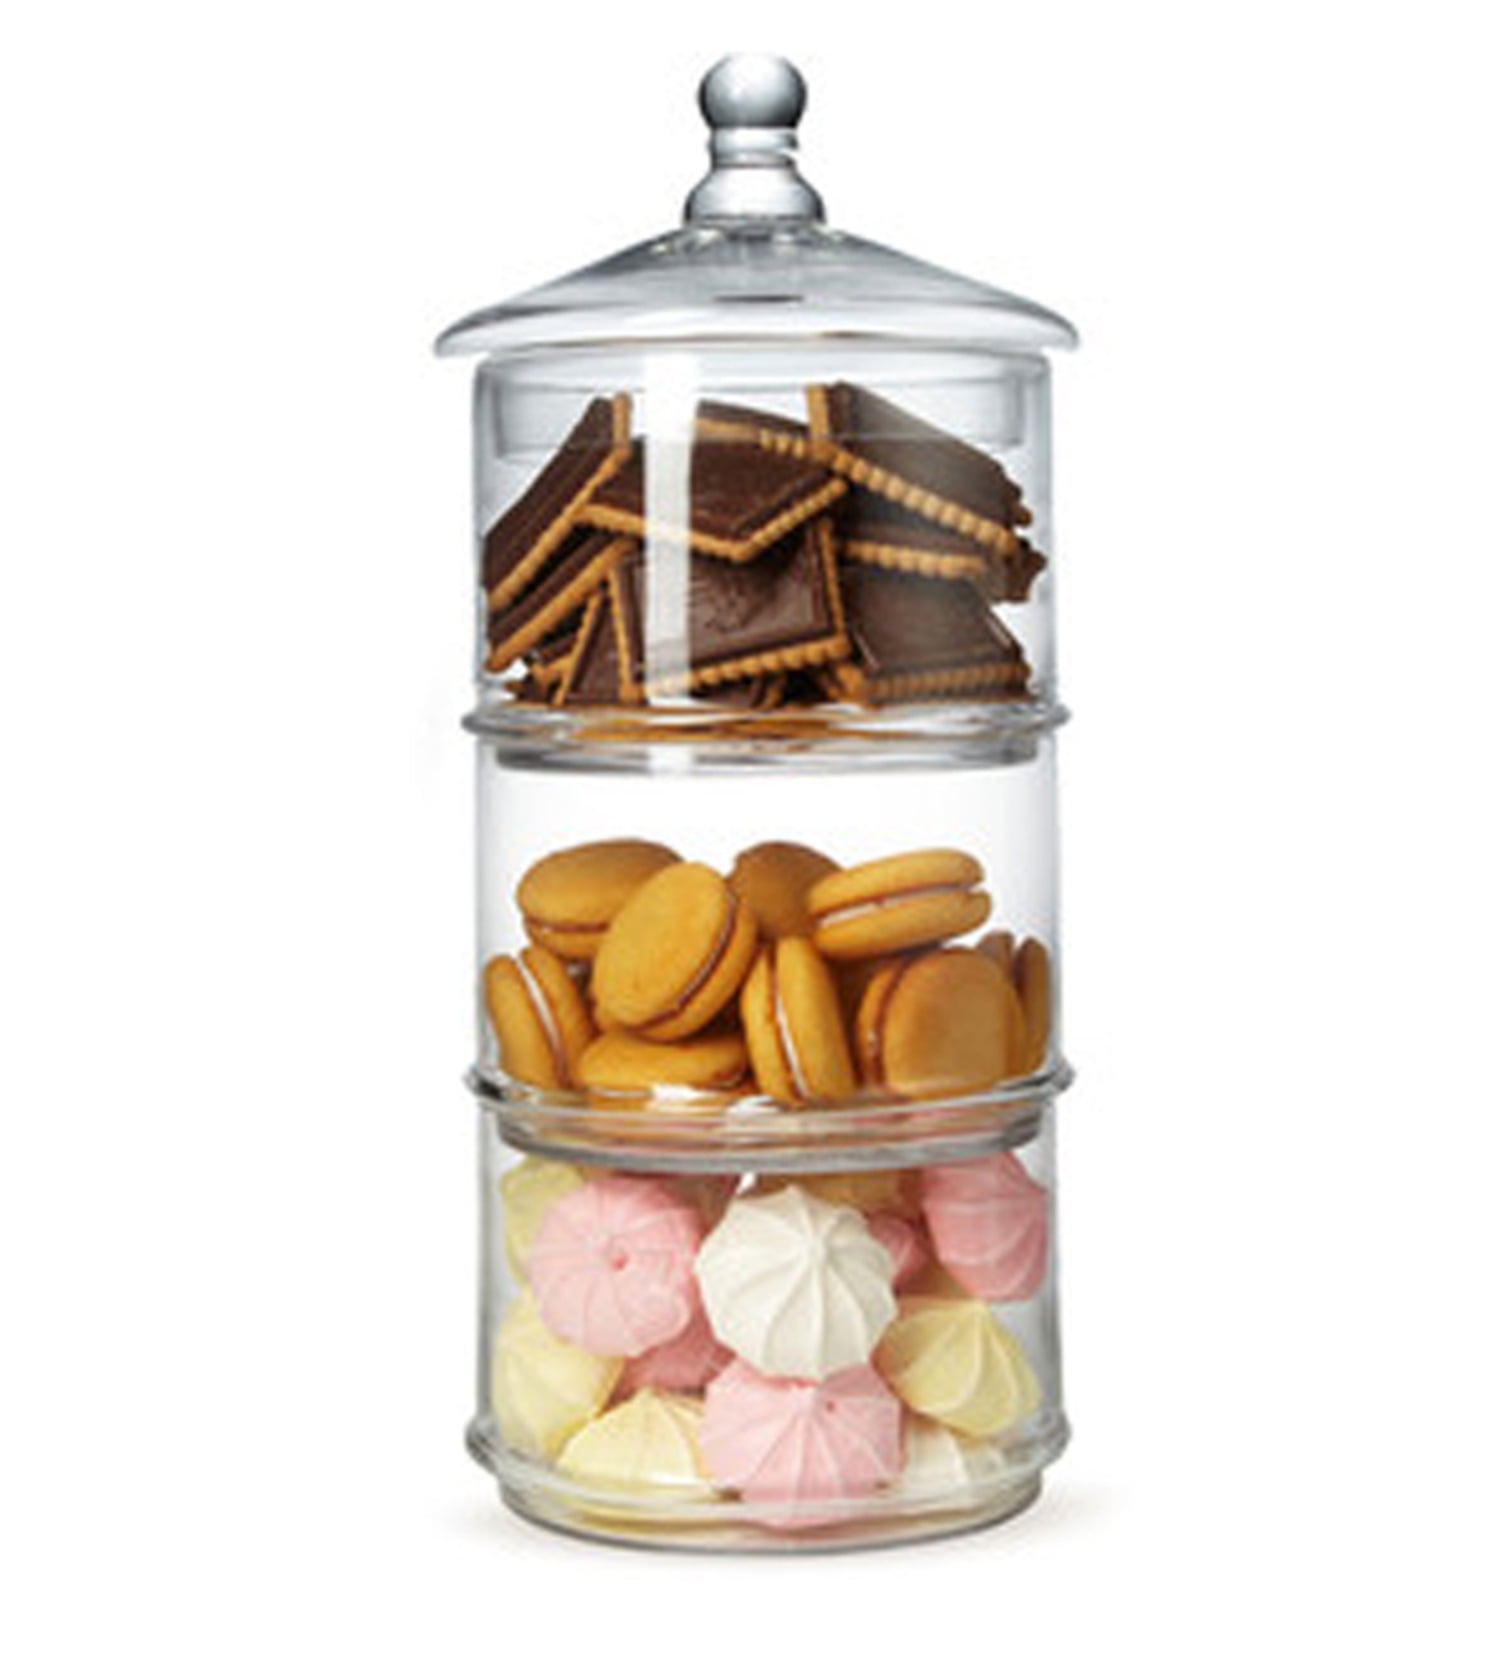 16.5 Inch Apothecary Candy Jar